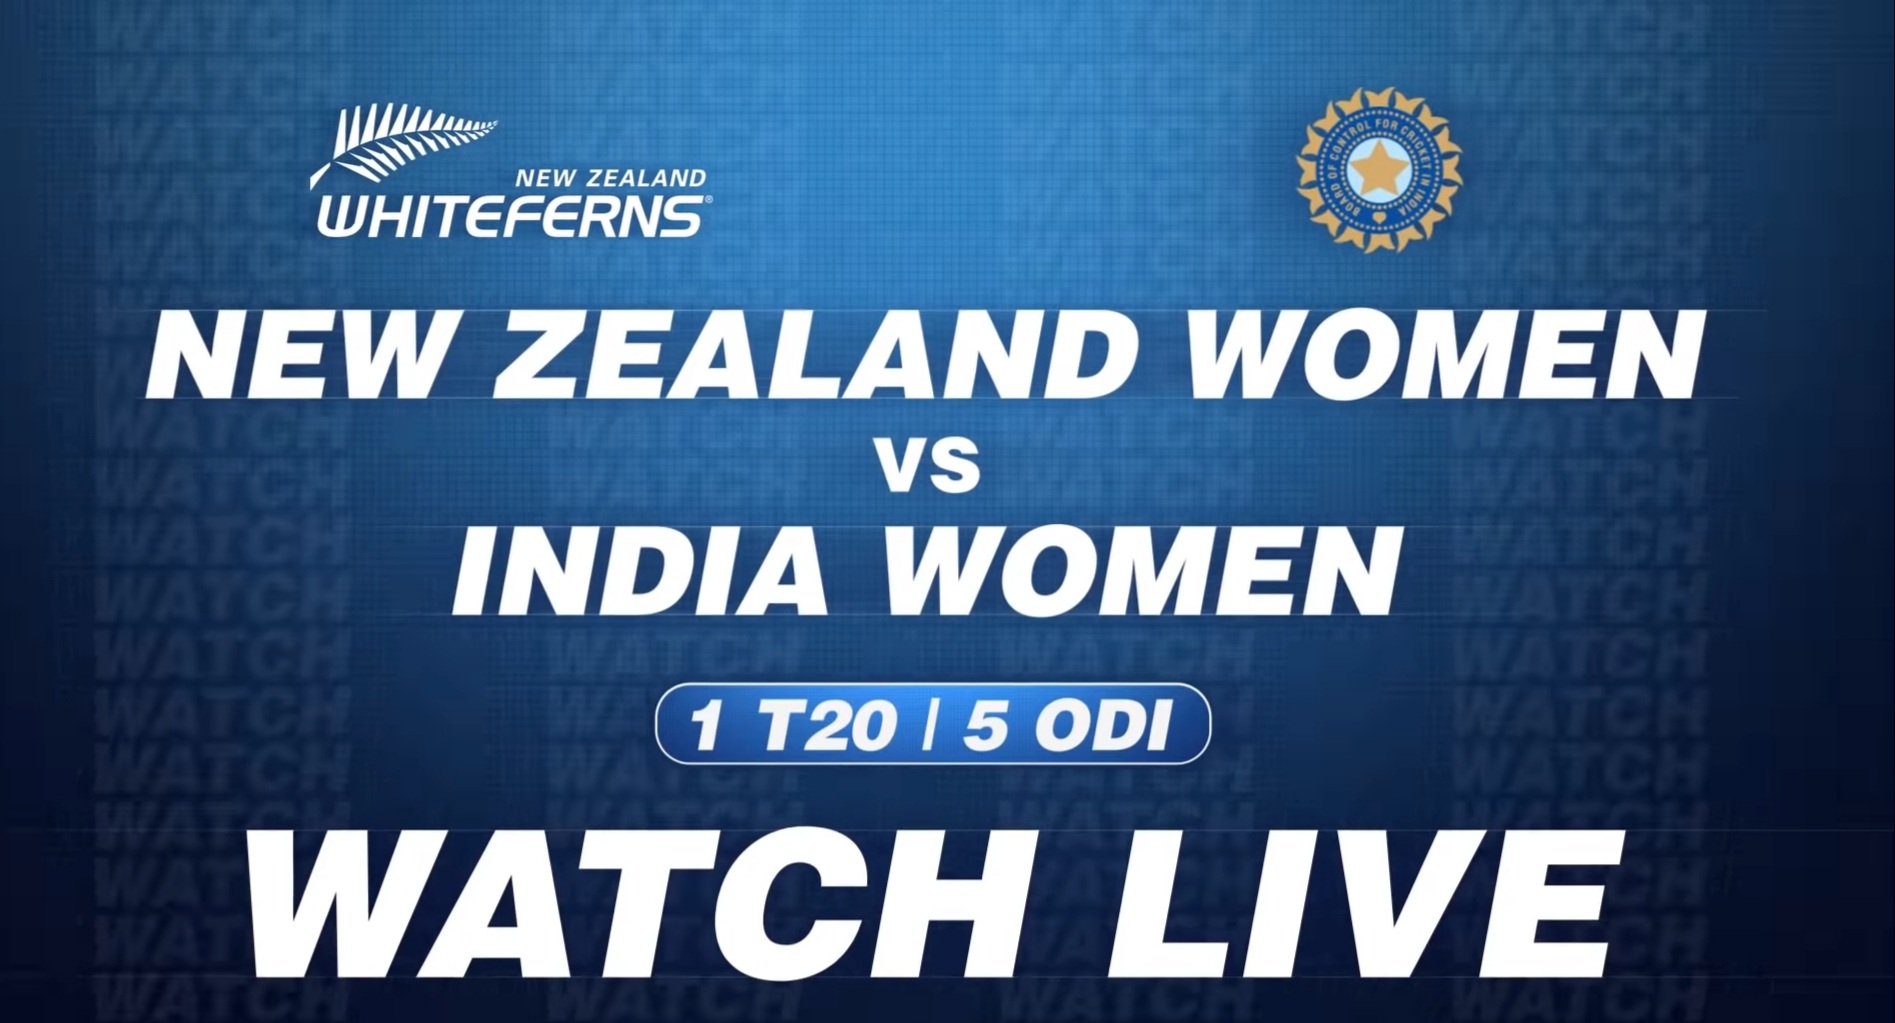 Catch live action on Amazon Prime Video as the Women in Blue take on White ferns!